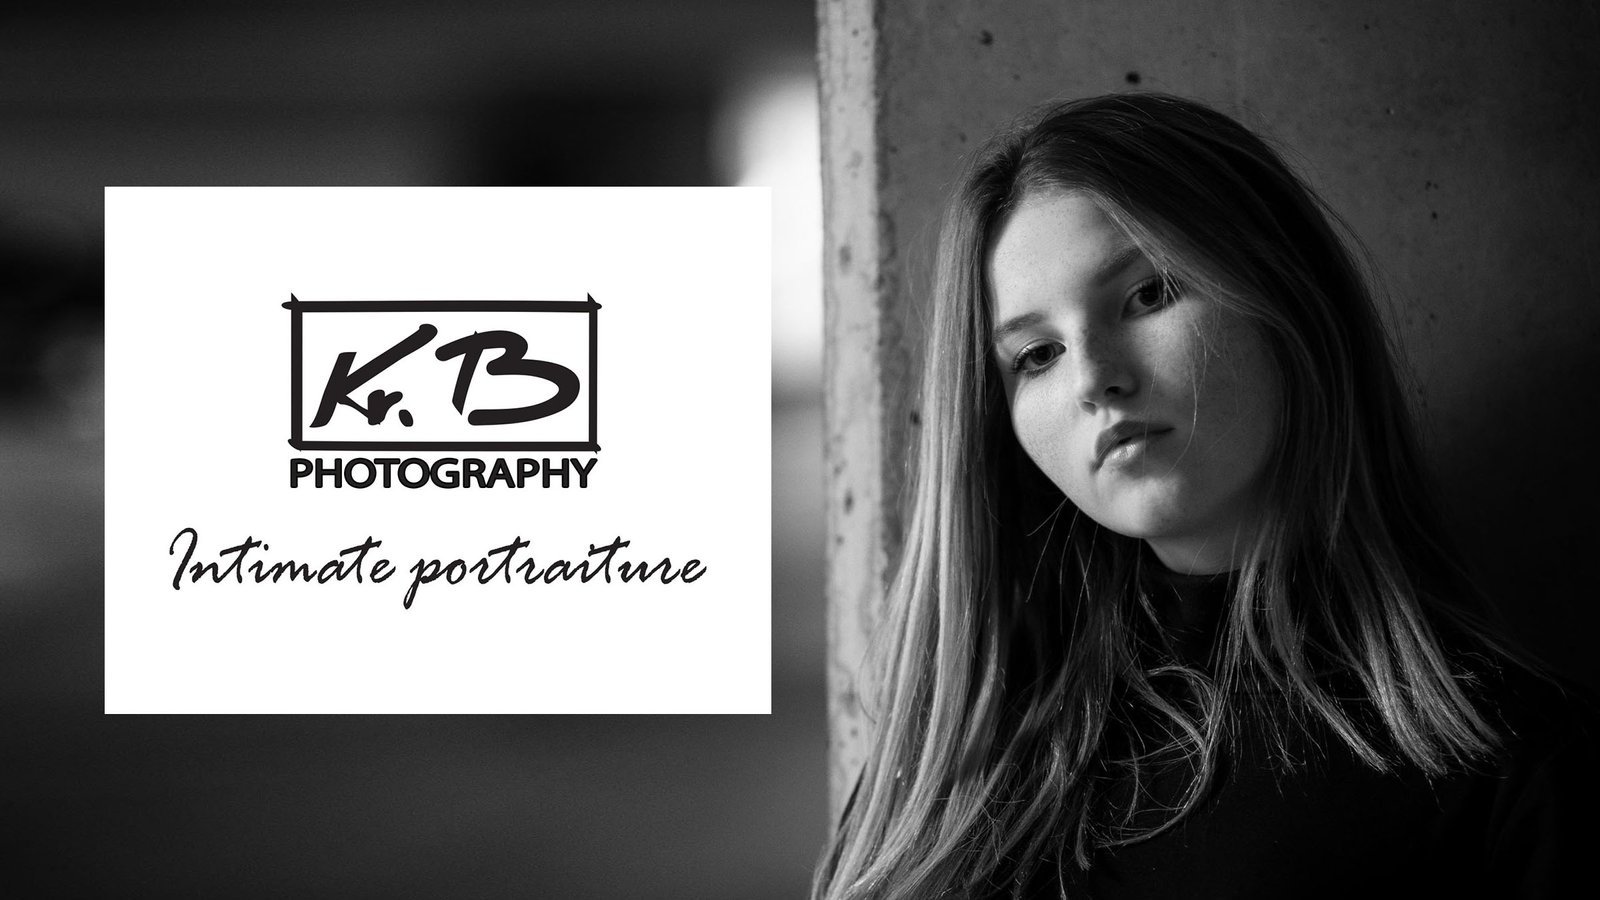 KrB Photography, cover photo 2